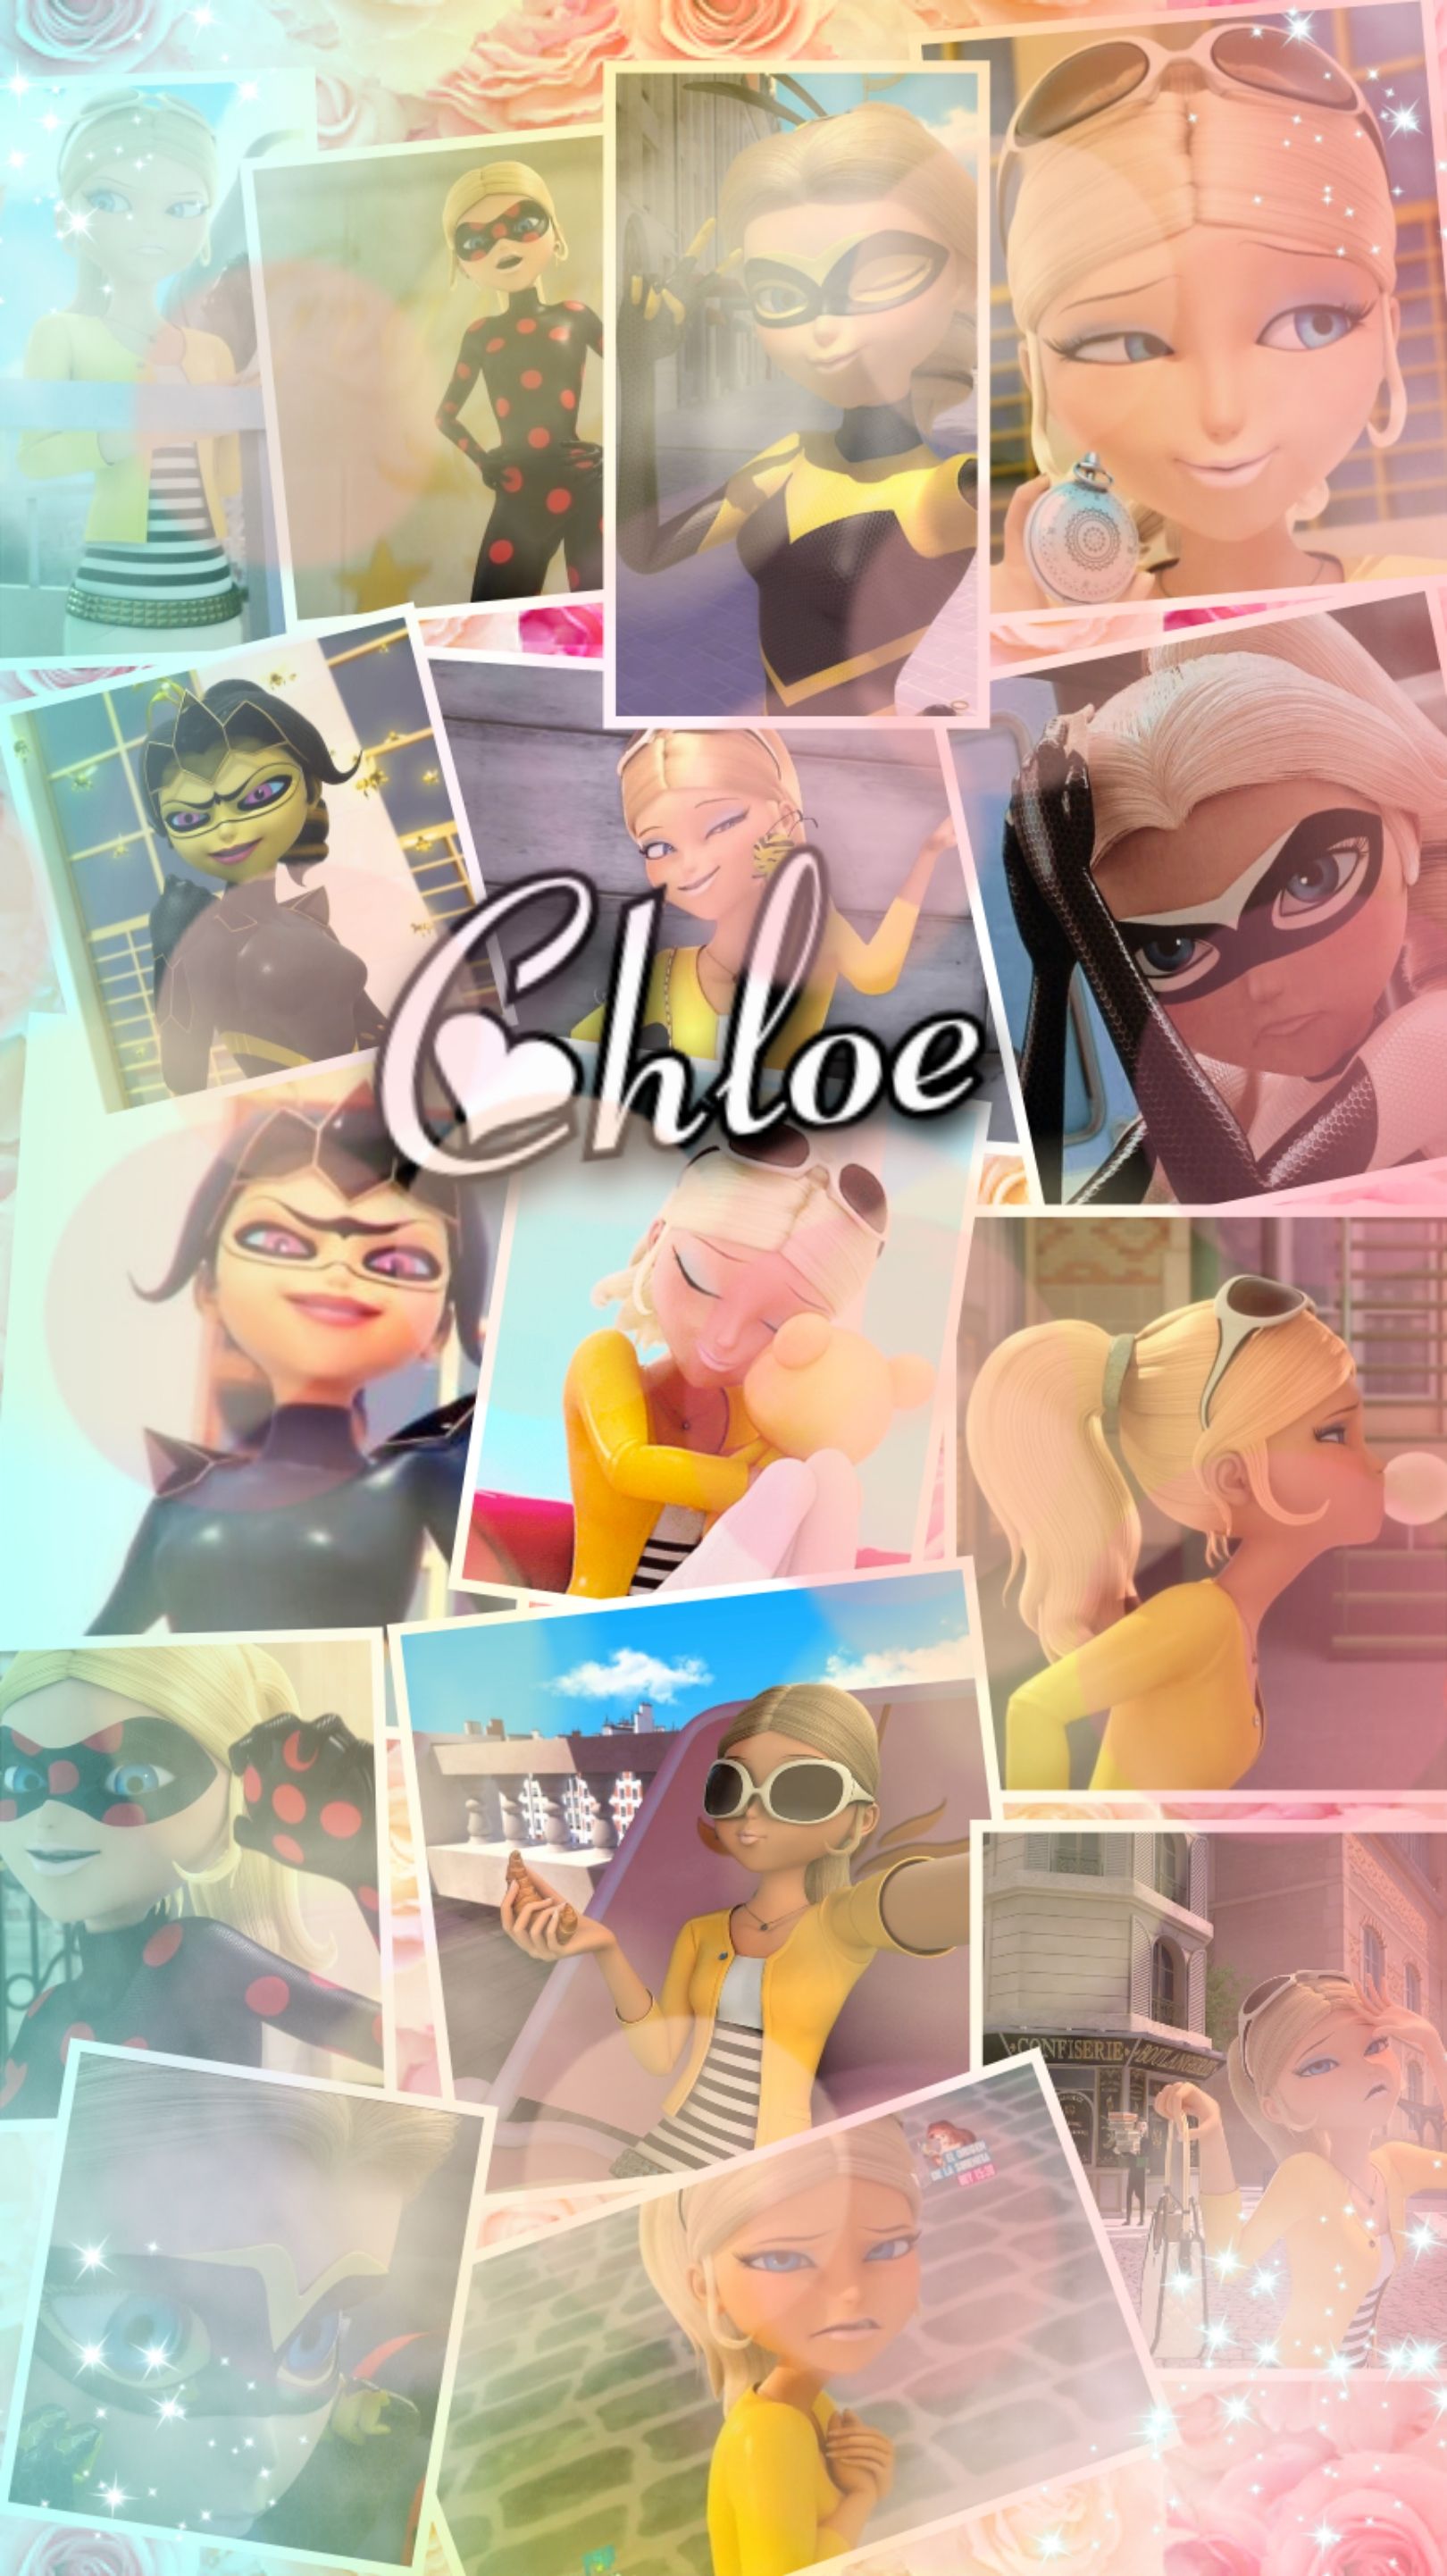 I made a wallpaper of chloe. Everyone hates on her but I think that there's lots of room for improvement, Thomas said so himself:)